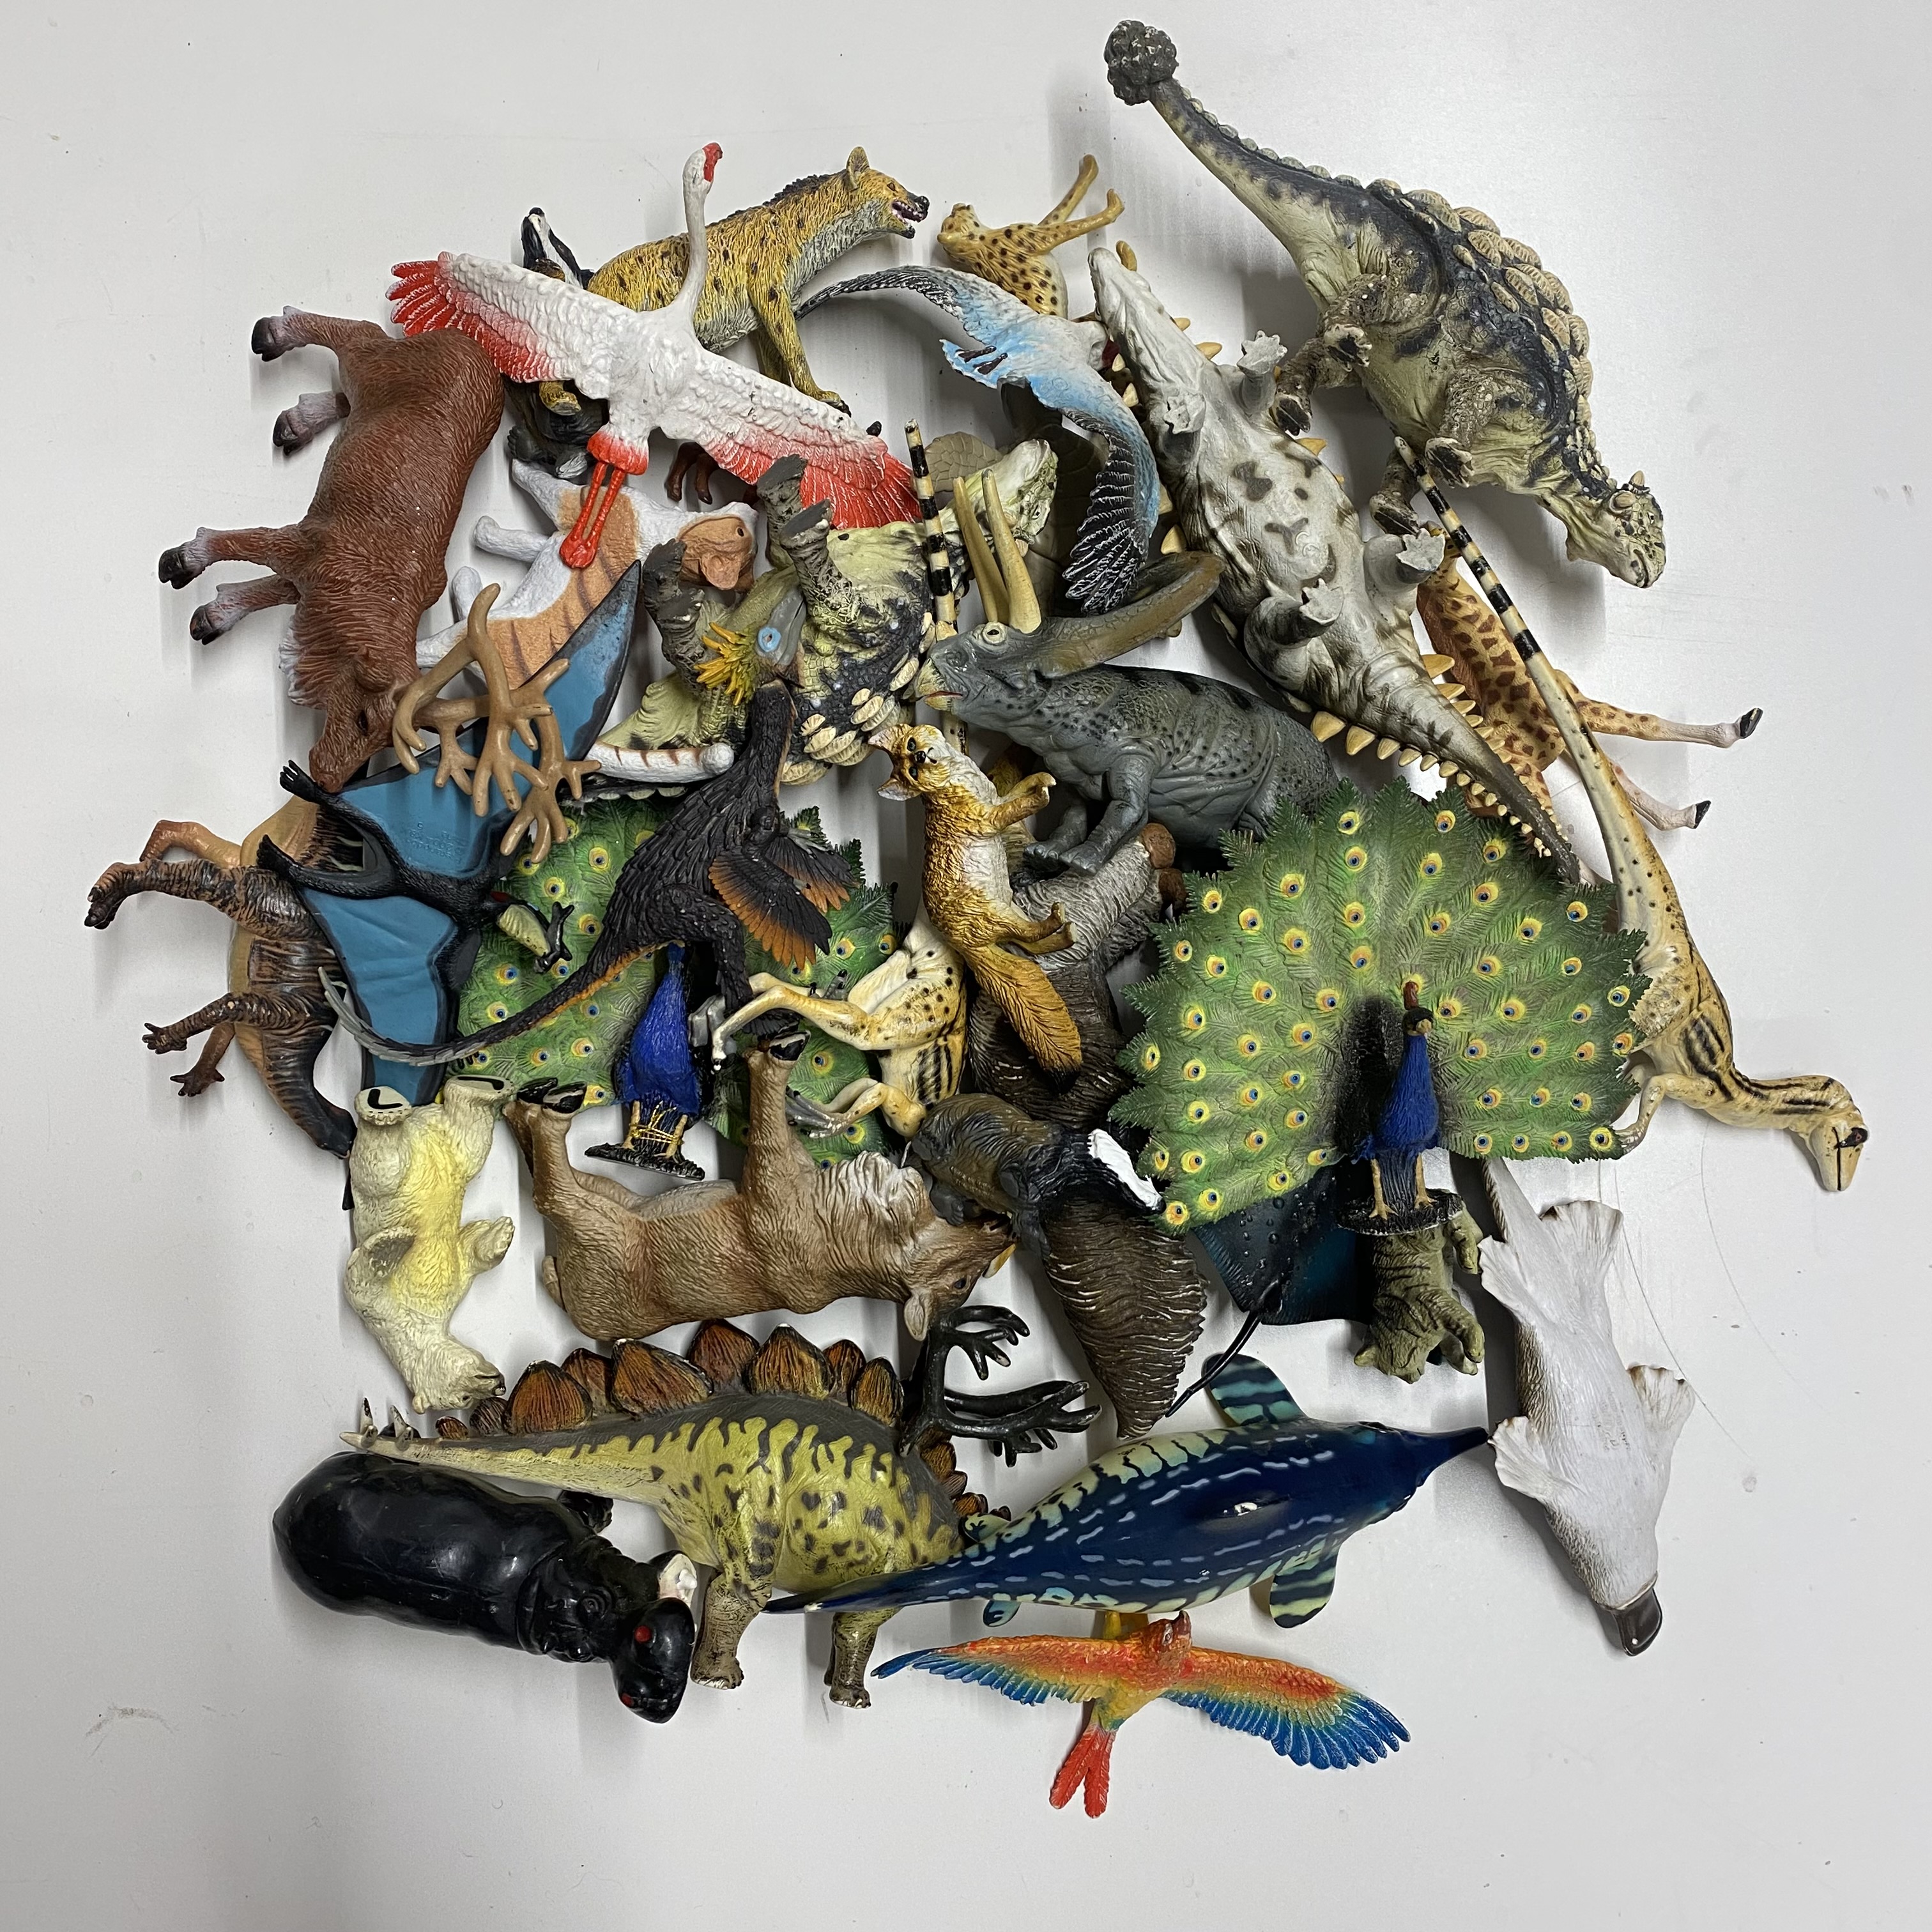 A collection of animals and dinosaurs.